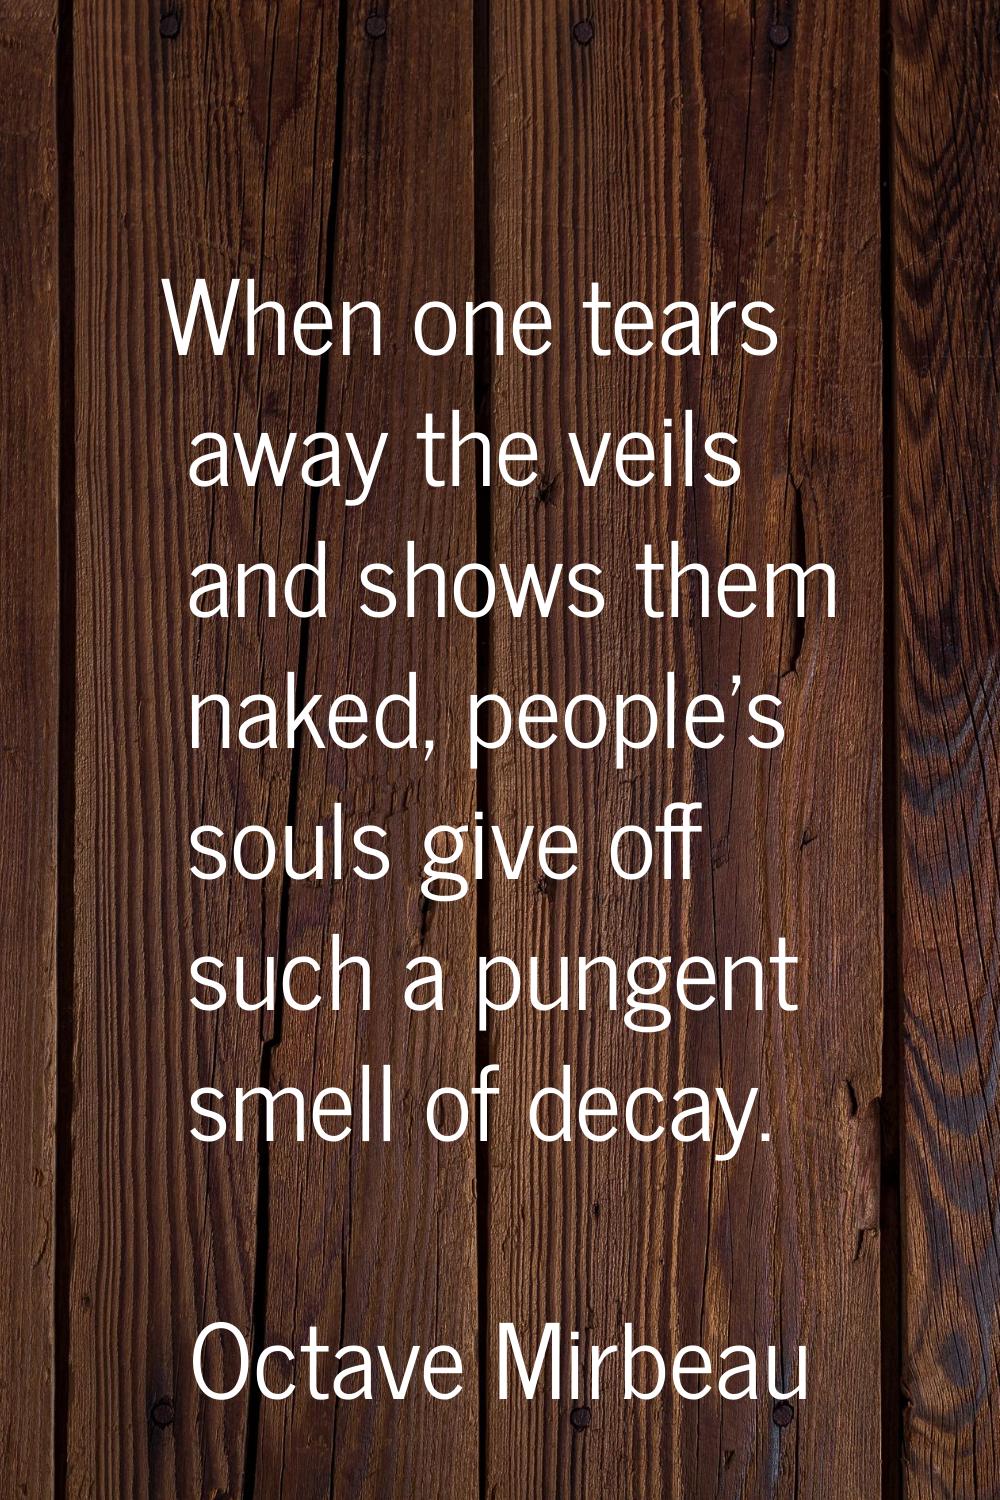 When one tears away the veils and shows them naked, people's souls give off such a pungent smell of